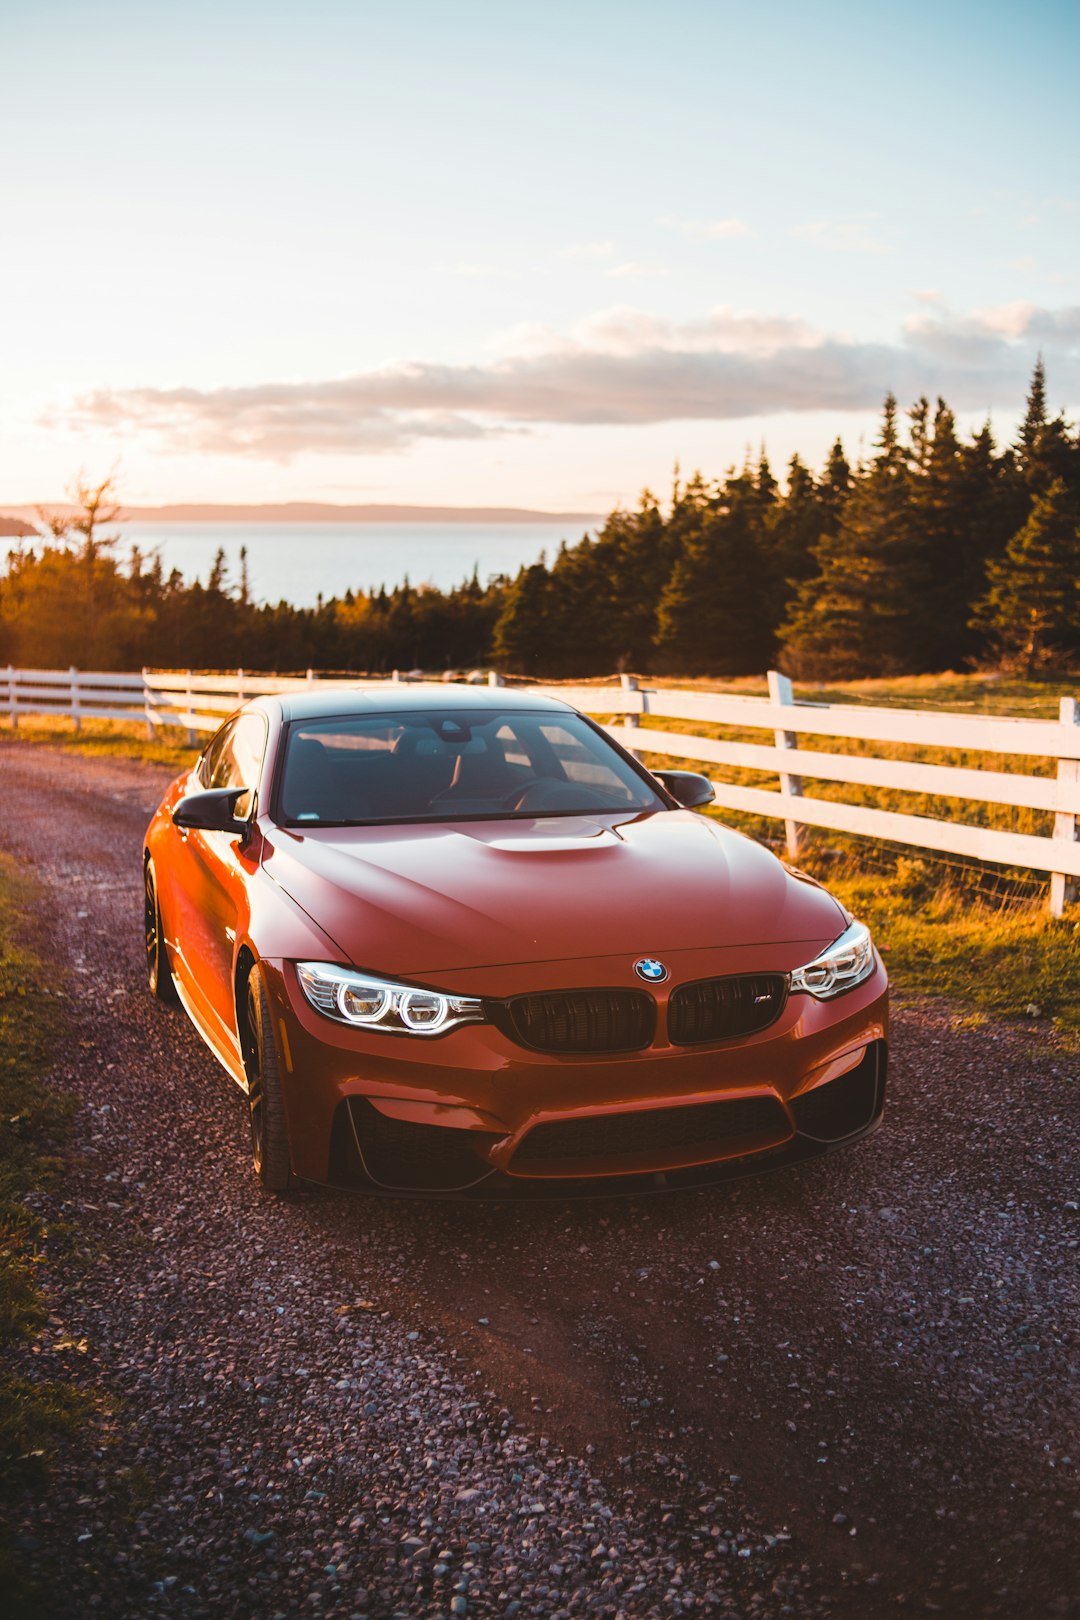 brown bmw m 3 parked on dirt road near wooden fence during daytime